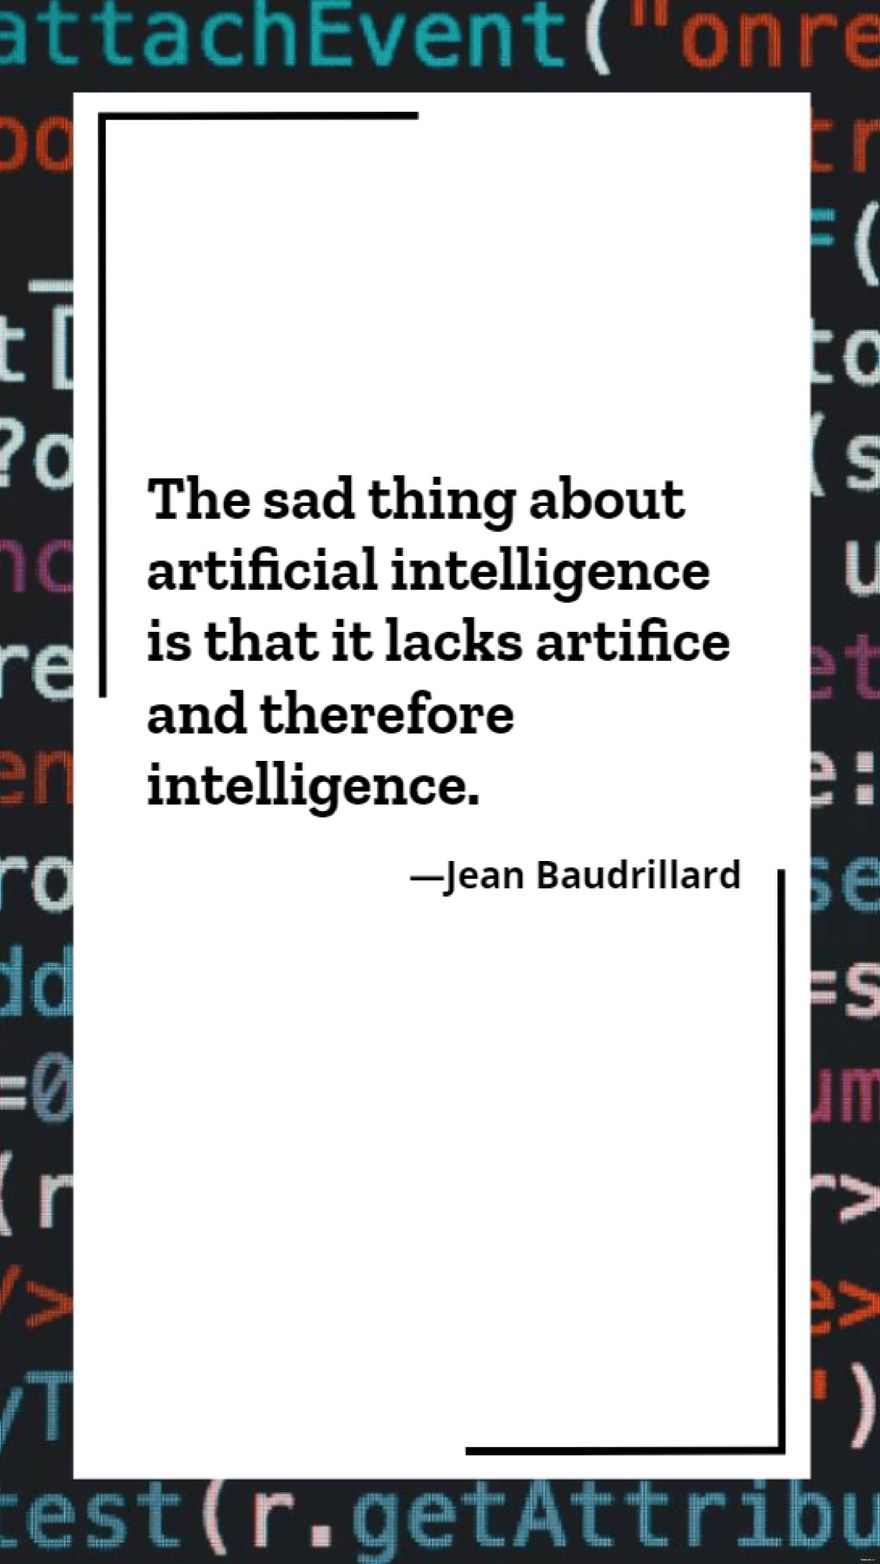 Jean Baudrillard - The sad thing about artificial intelligence is that it lacks artifice and therefore intelligence.